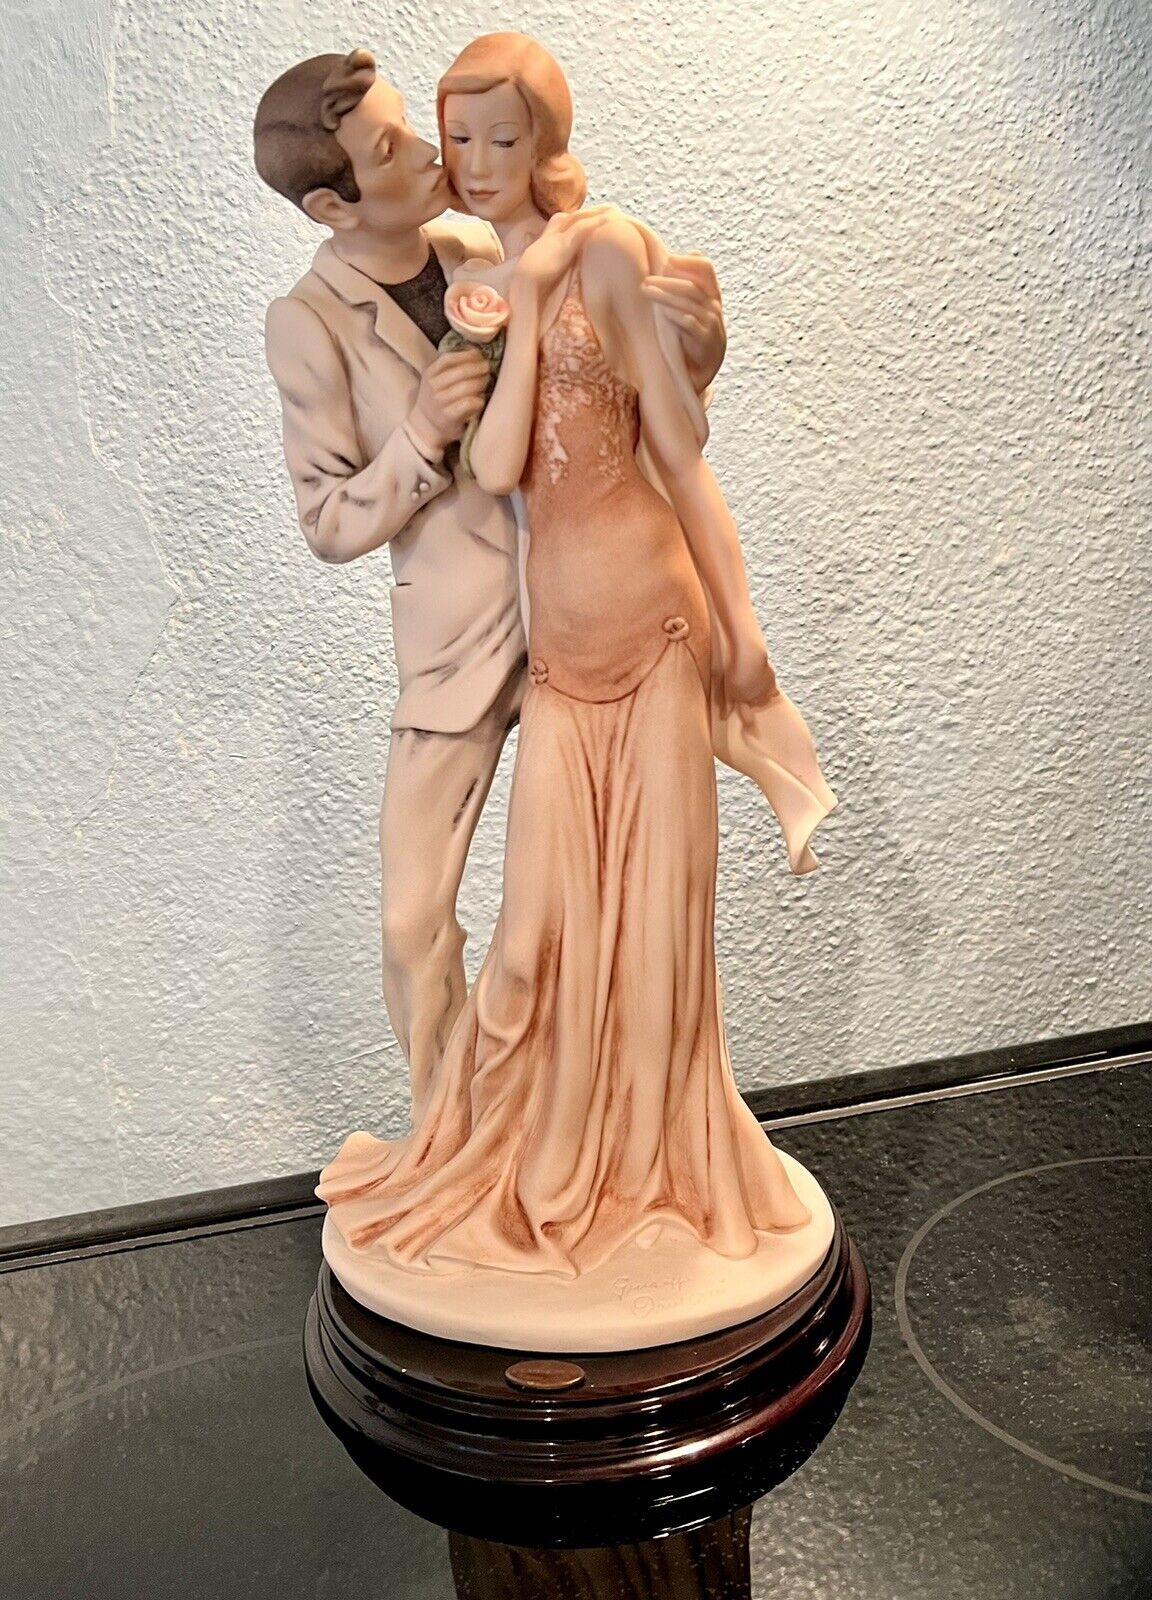 Giuseppe Armani Florence Italy “First Kiss” 13” Capodimonte 2004 MINT Signed